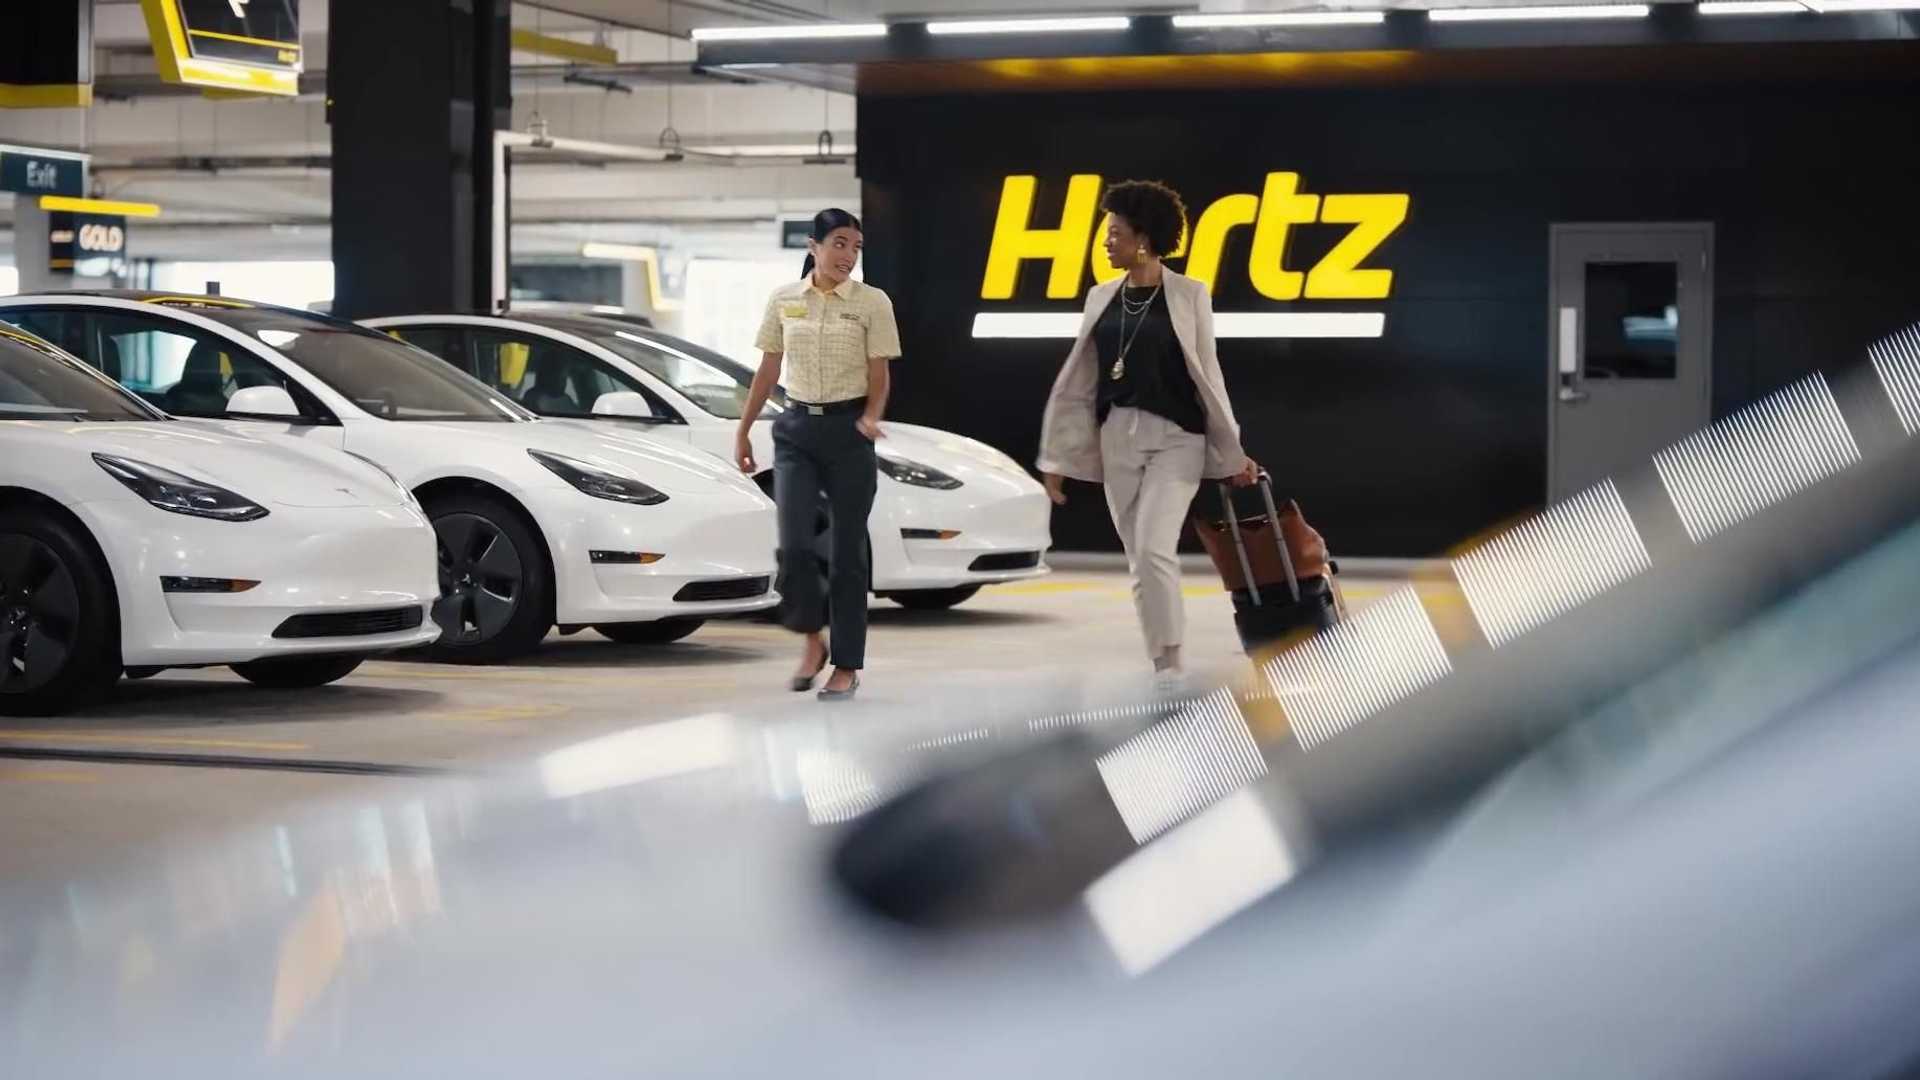 Electric Dreams to Real Challenges How Hertz's Big Bet on Tesla Cars Sparked a CEO Swap and Shook Up the Car Rental World--